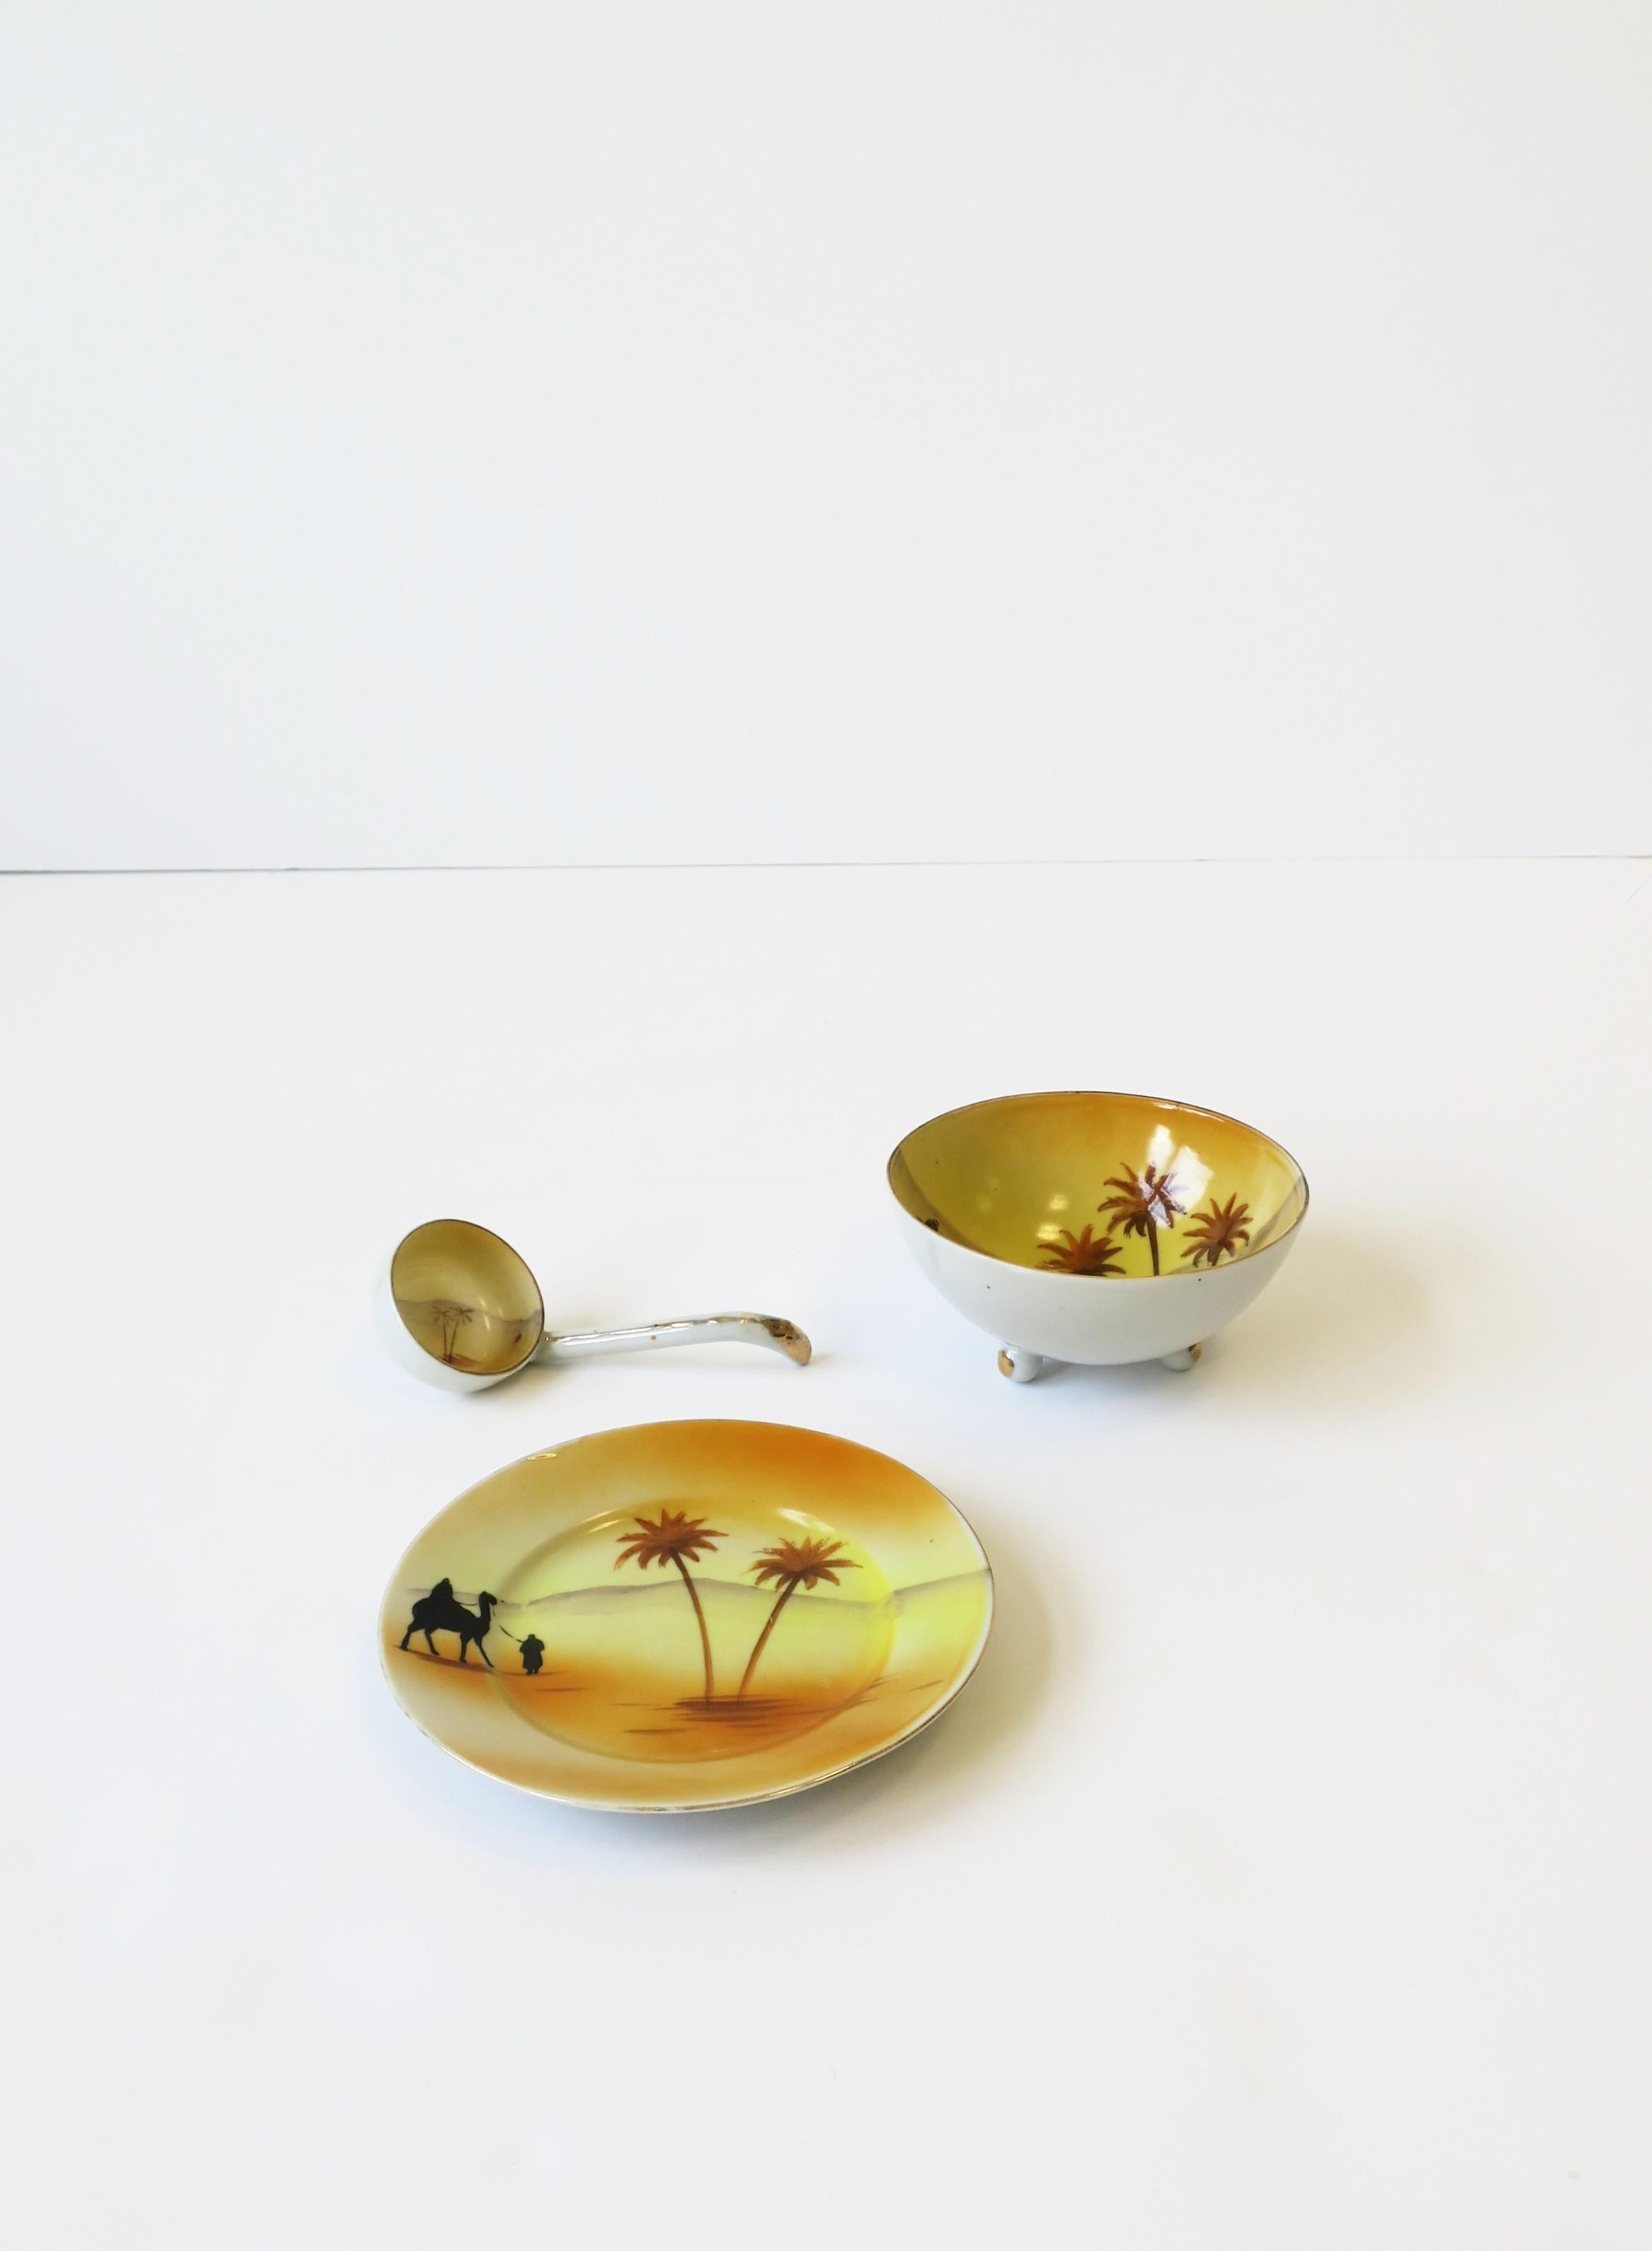 Porcelain Desert Palm Serving Set with Ladle Spoon In Good Condition For Sale In New York, NY